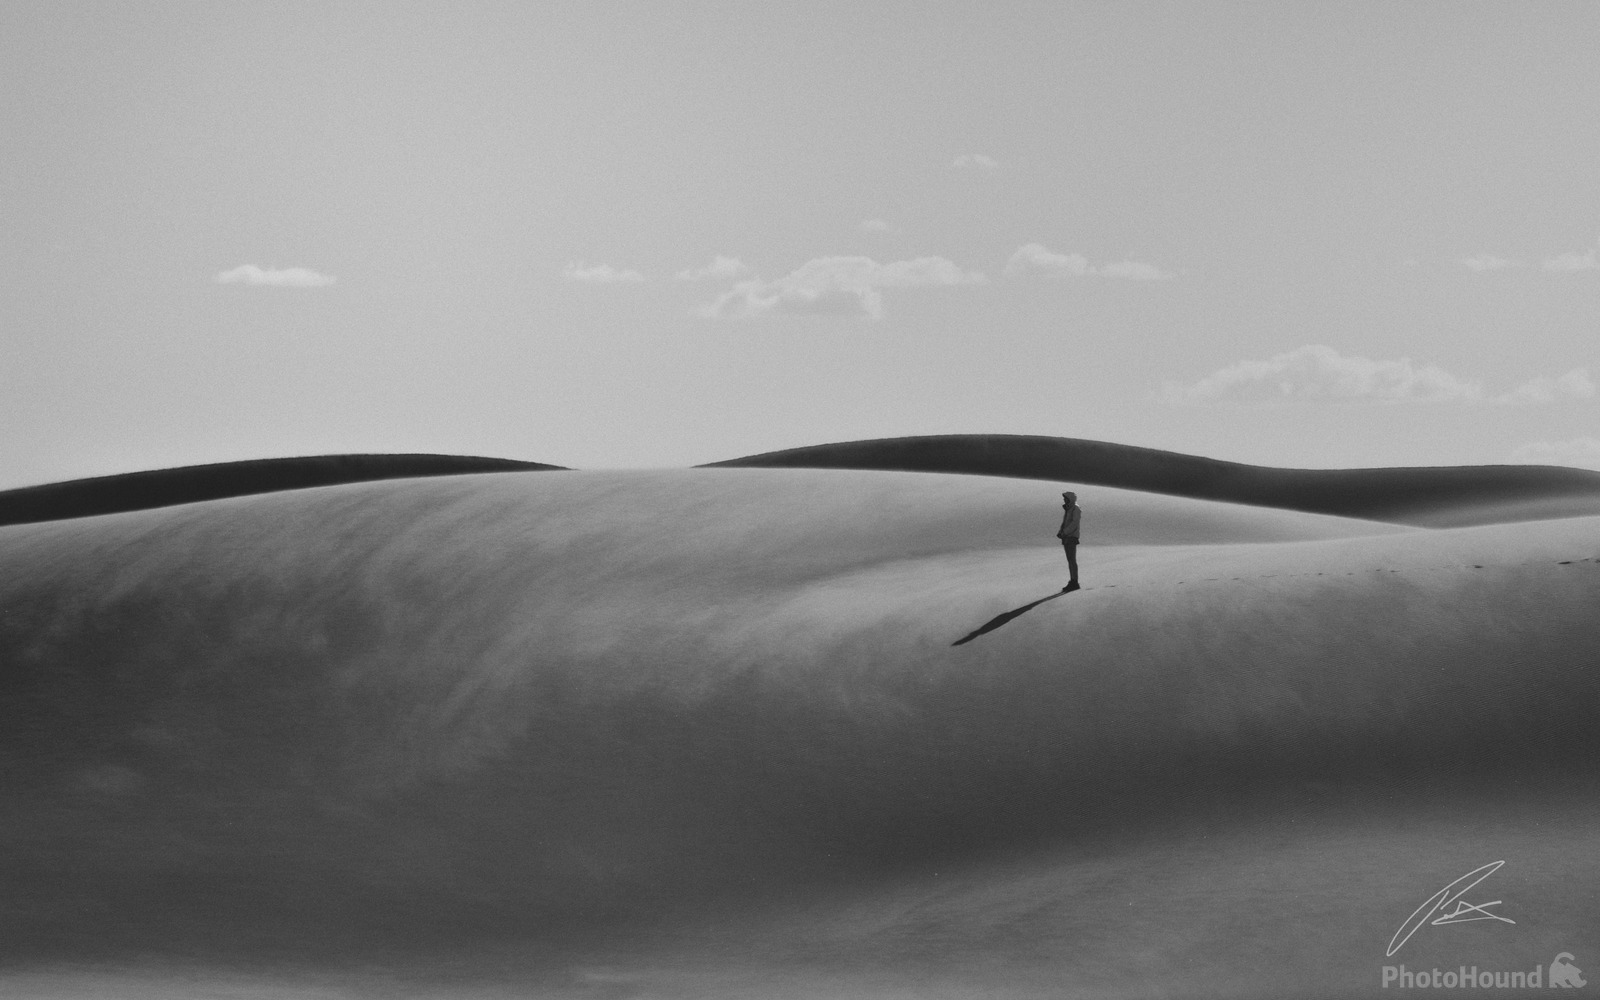 Image of Great Sand Dunes National Park - Dunes by Patrick Hulley